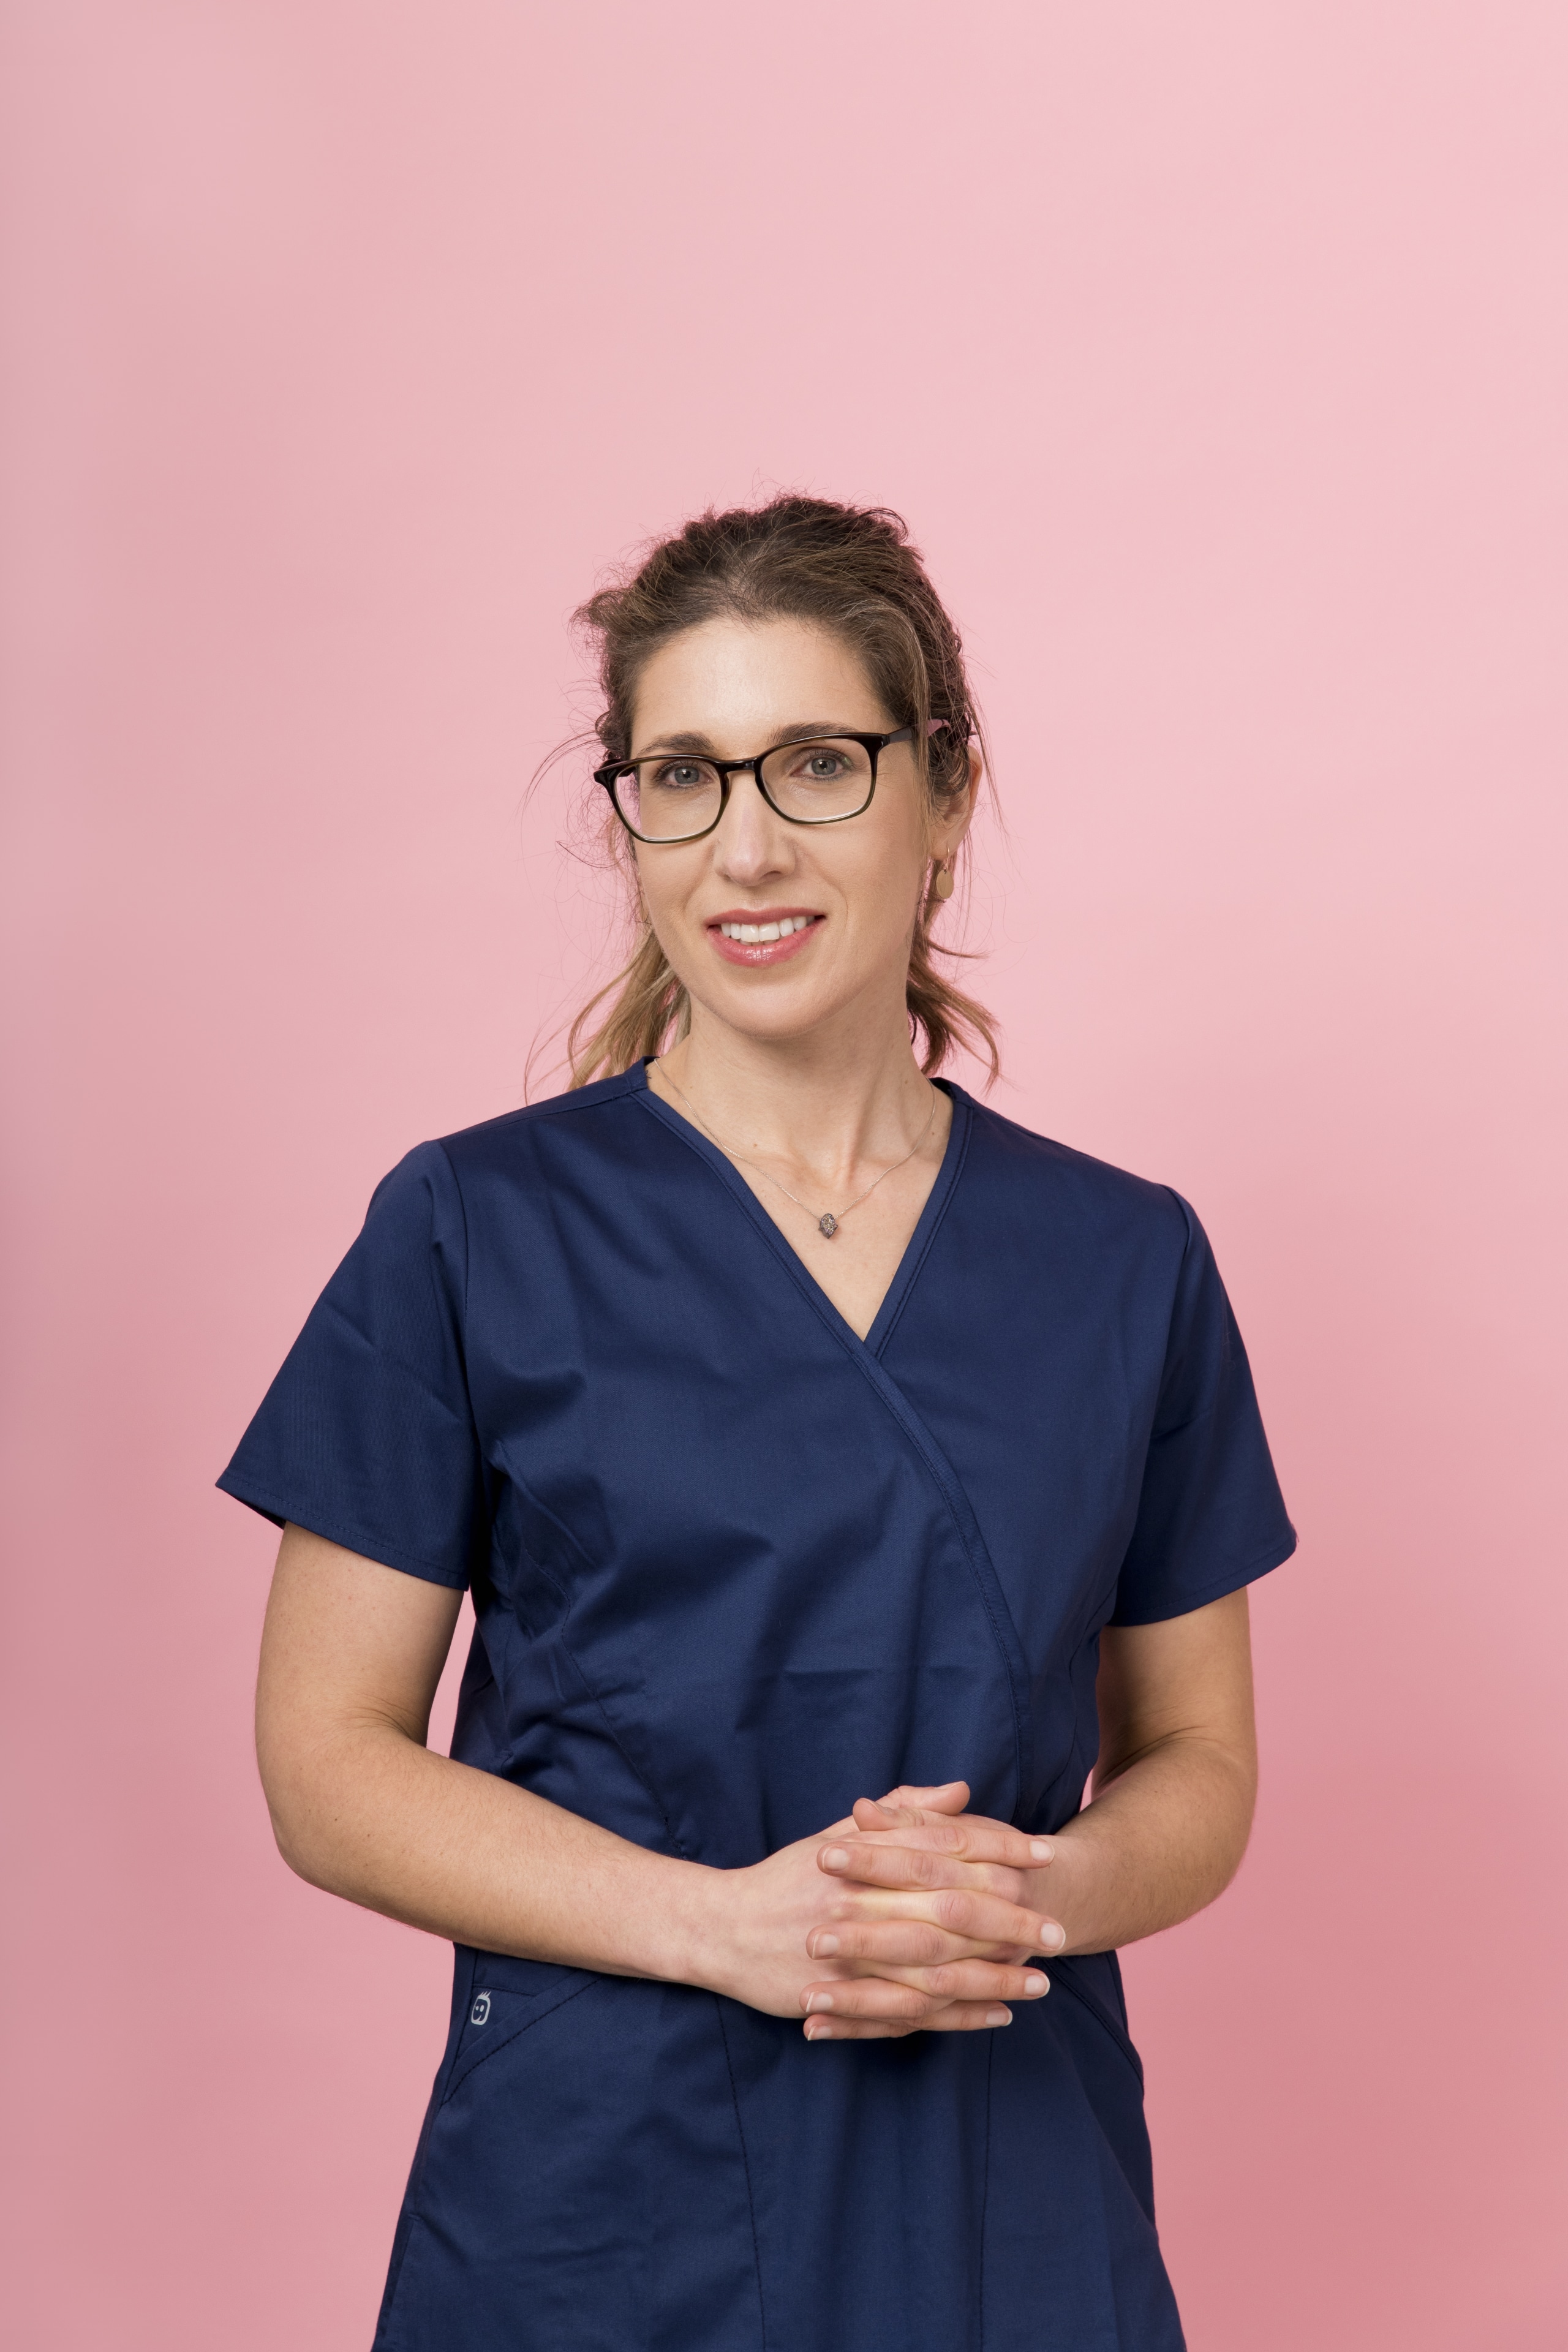 Fellow in scrubs against pink background